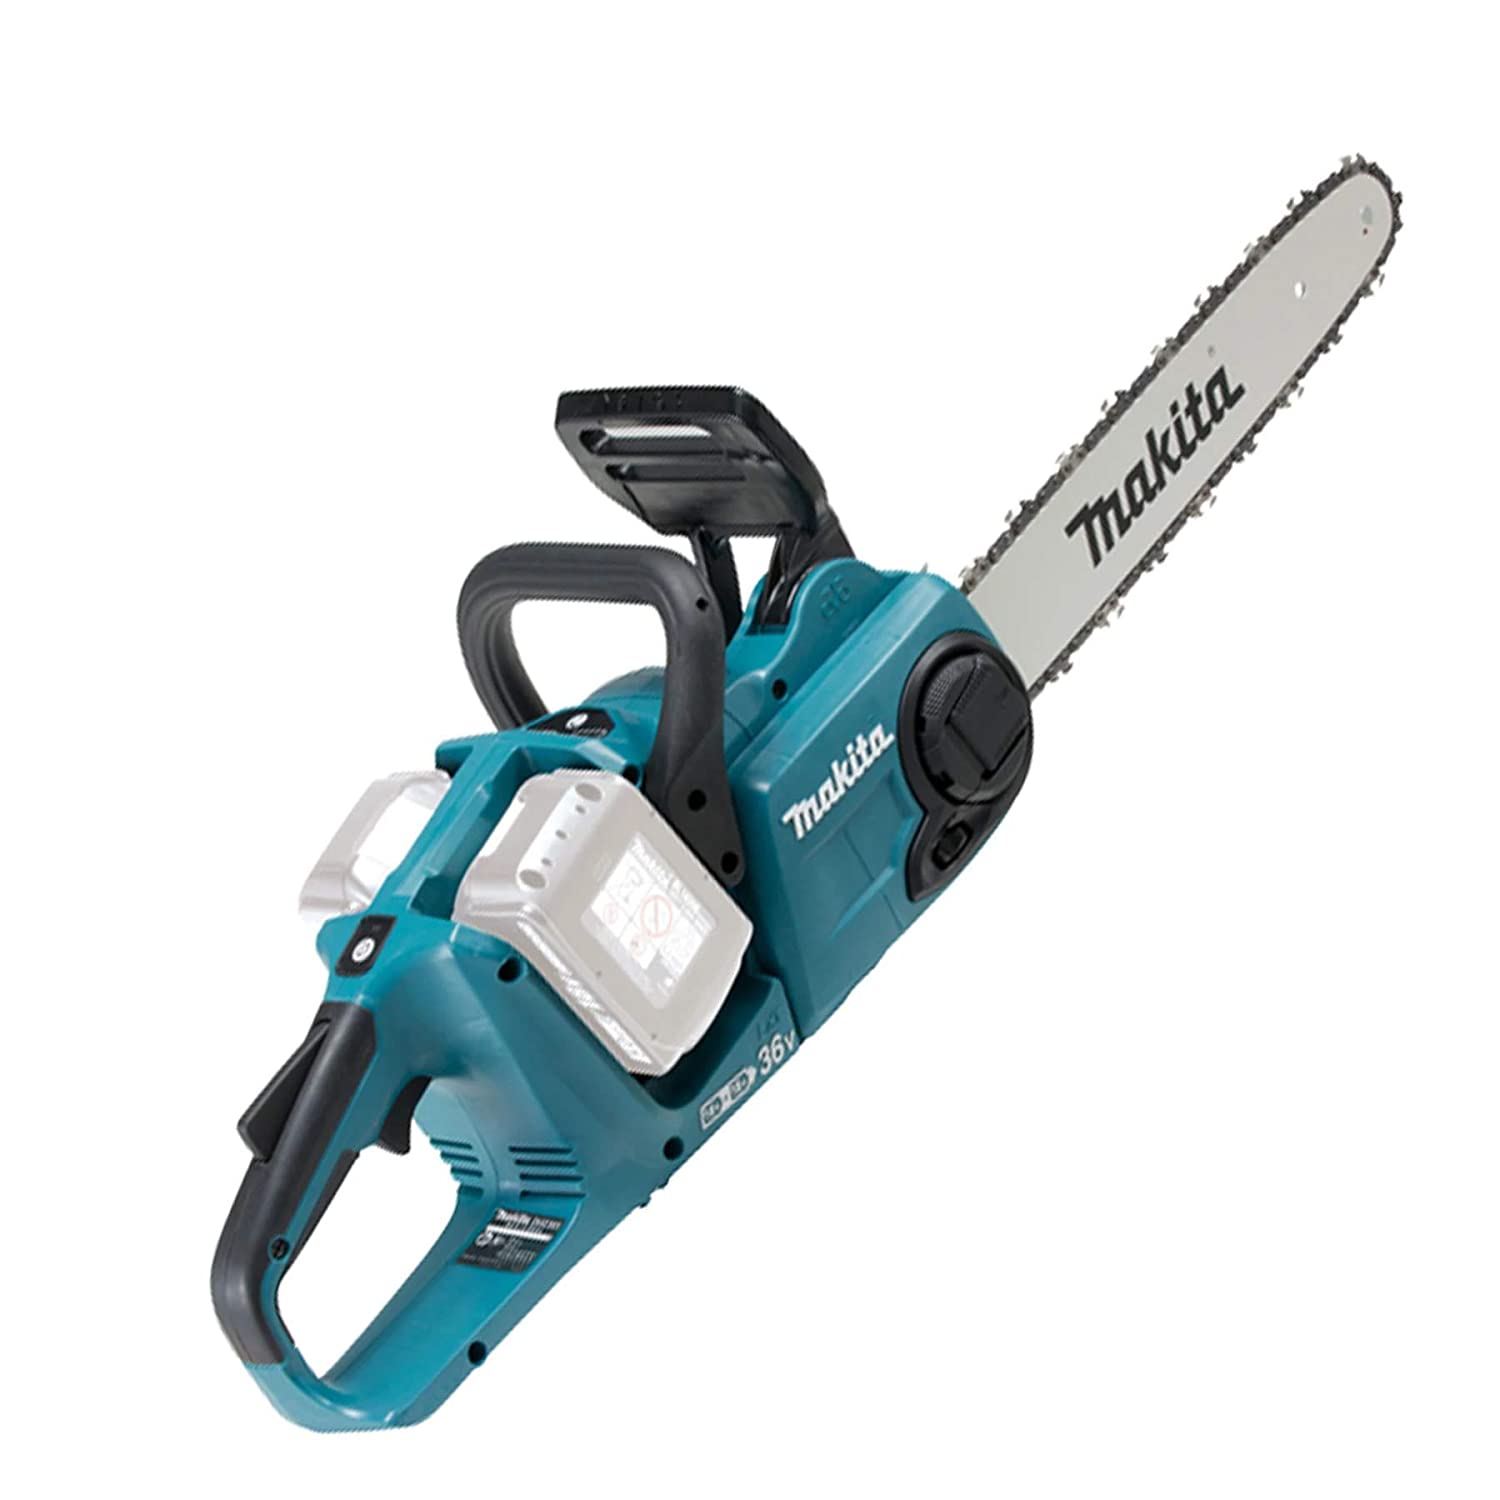 Makita DUC353Z Cordless ChainSaw 14 inch (Without Battery)